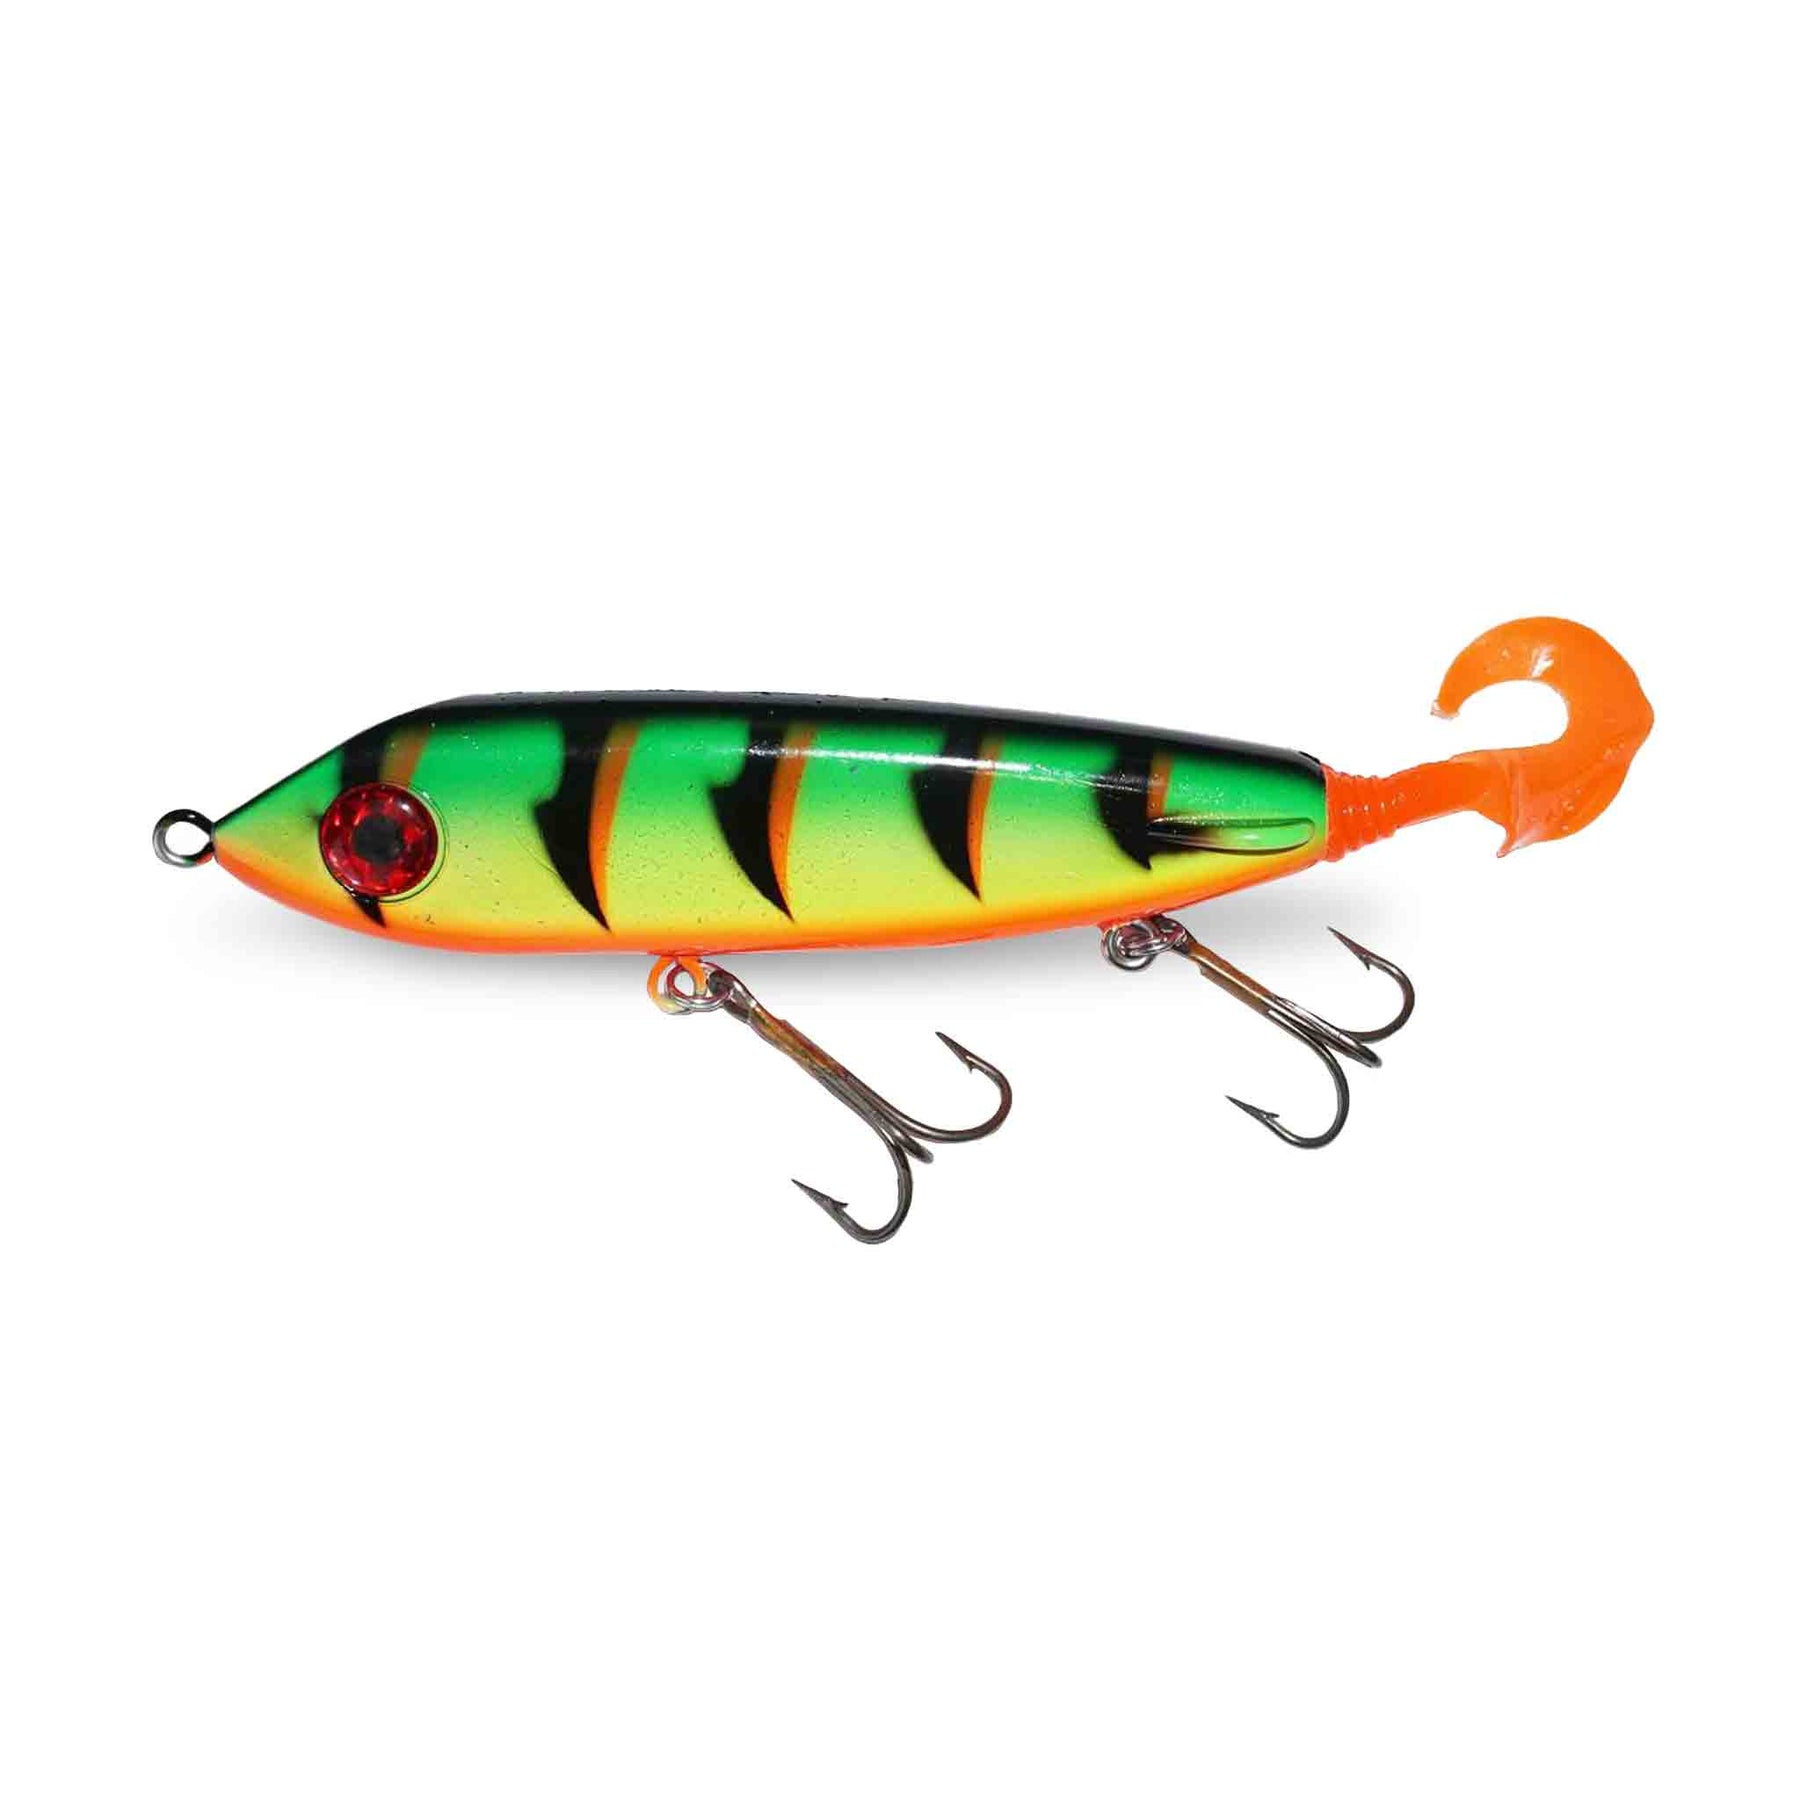 View of Jerk-Glide_Baits ERC Squirrelly Hell Hound 9'' Glide Bait Fire Tiger available at EZOKO Pike and Musky Shop